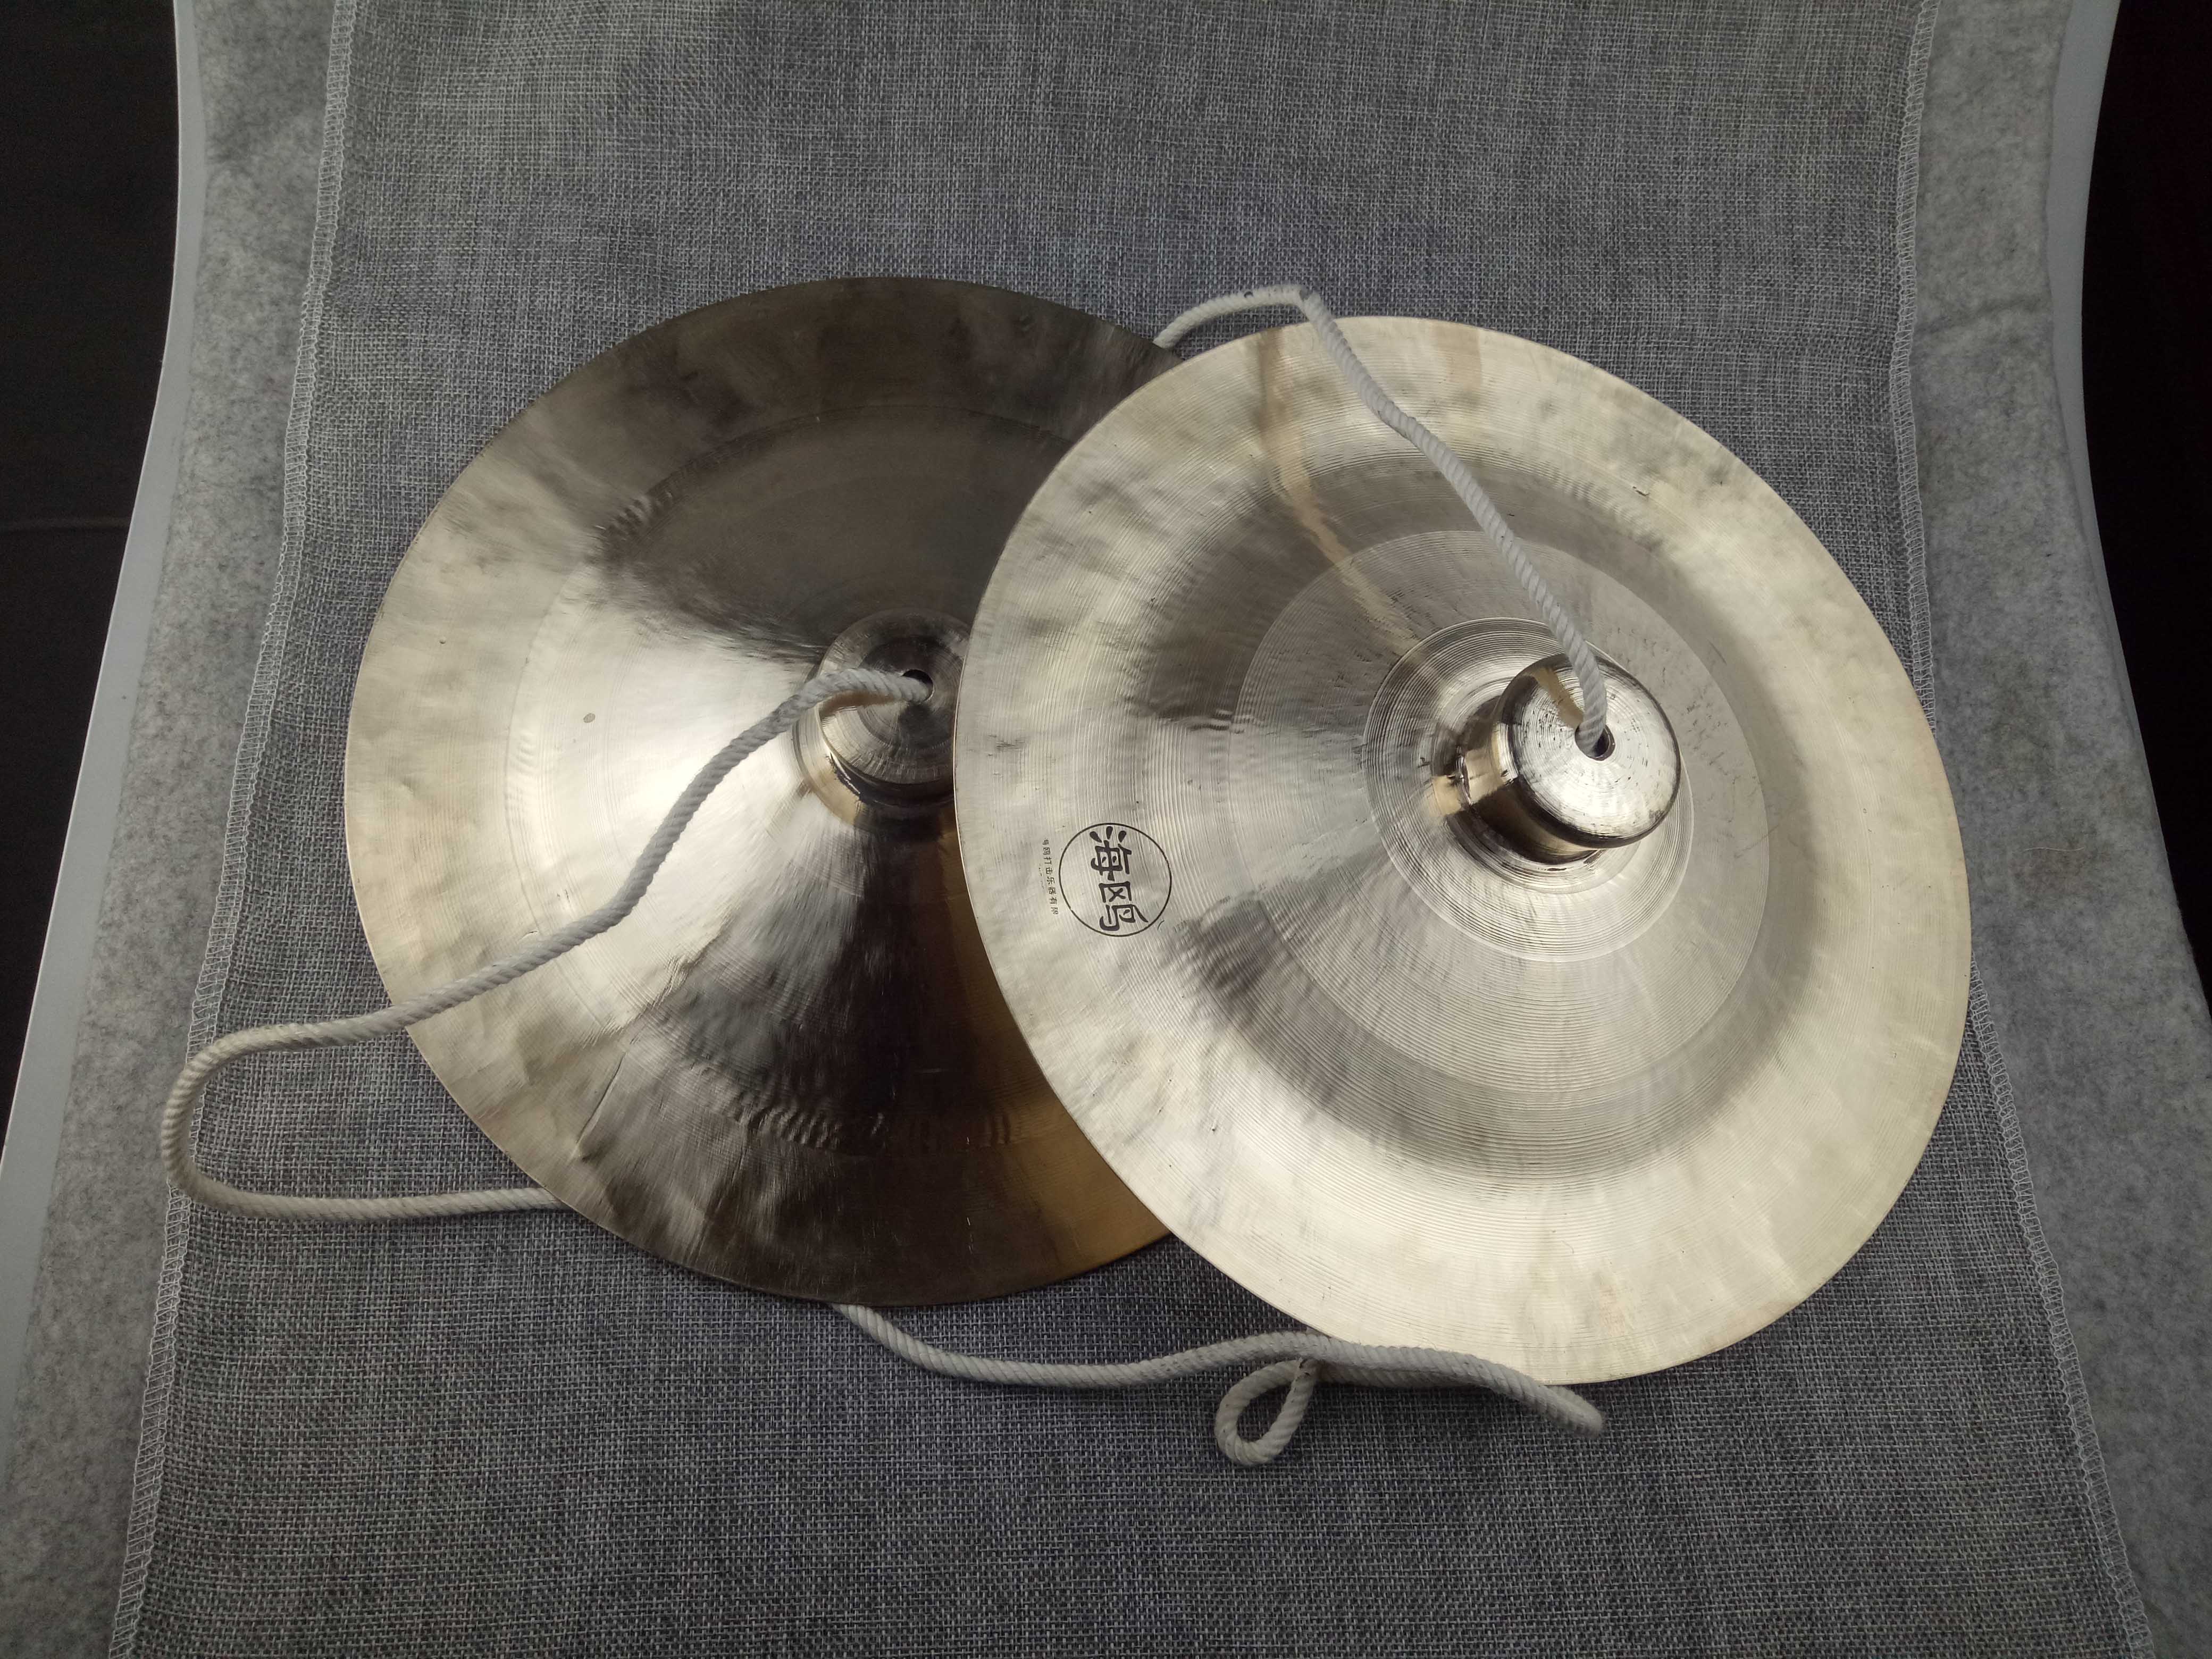 Wuhan Seagull brand cymbals Large cymbals Cymbals Cymbals Cymbals 20 CM 28 30 33 35 40 cm